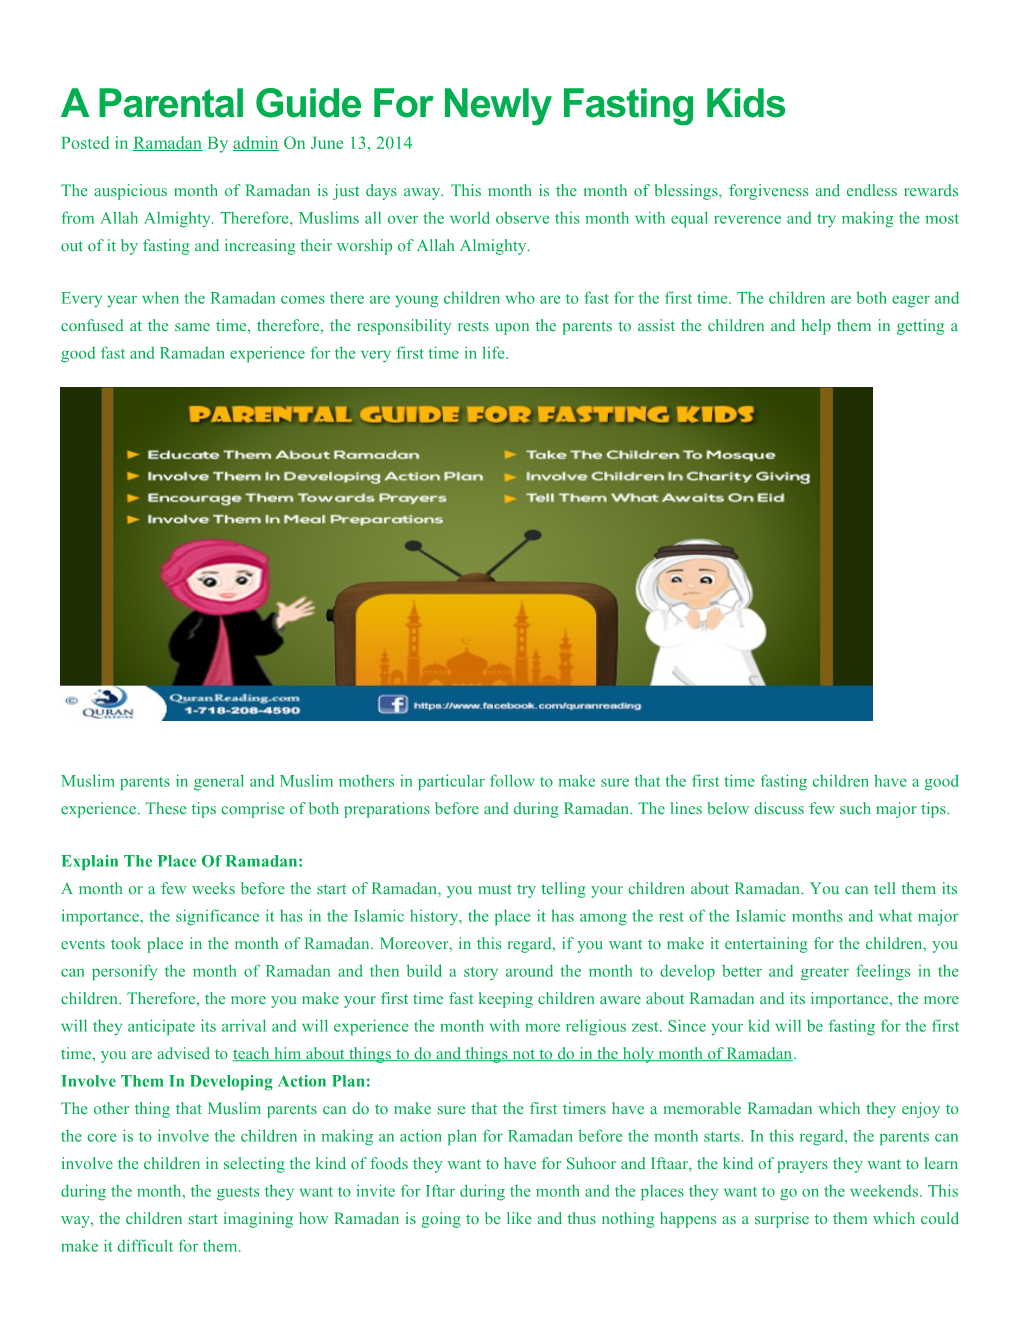 A Parental Guide for Newly Fasting Kids